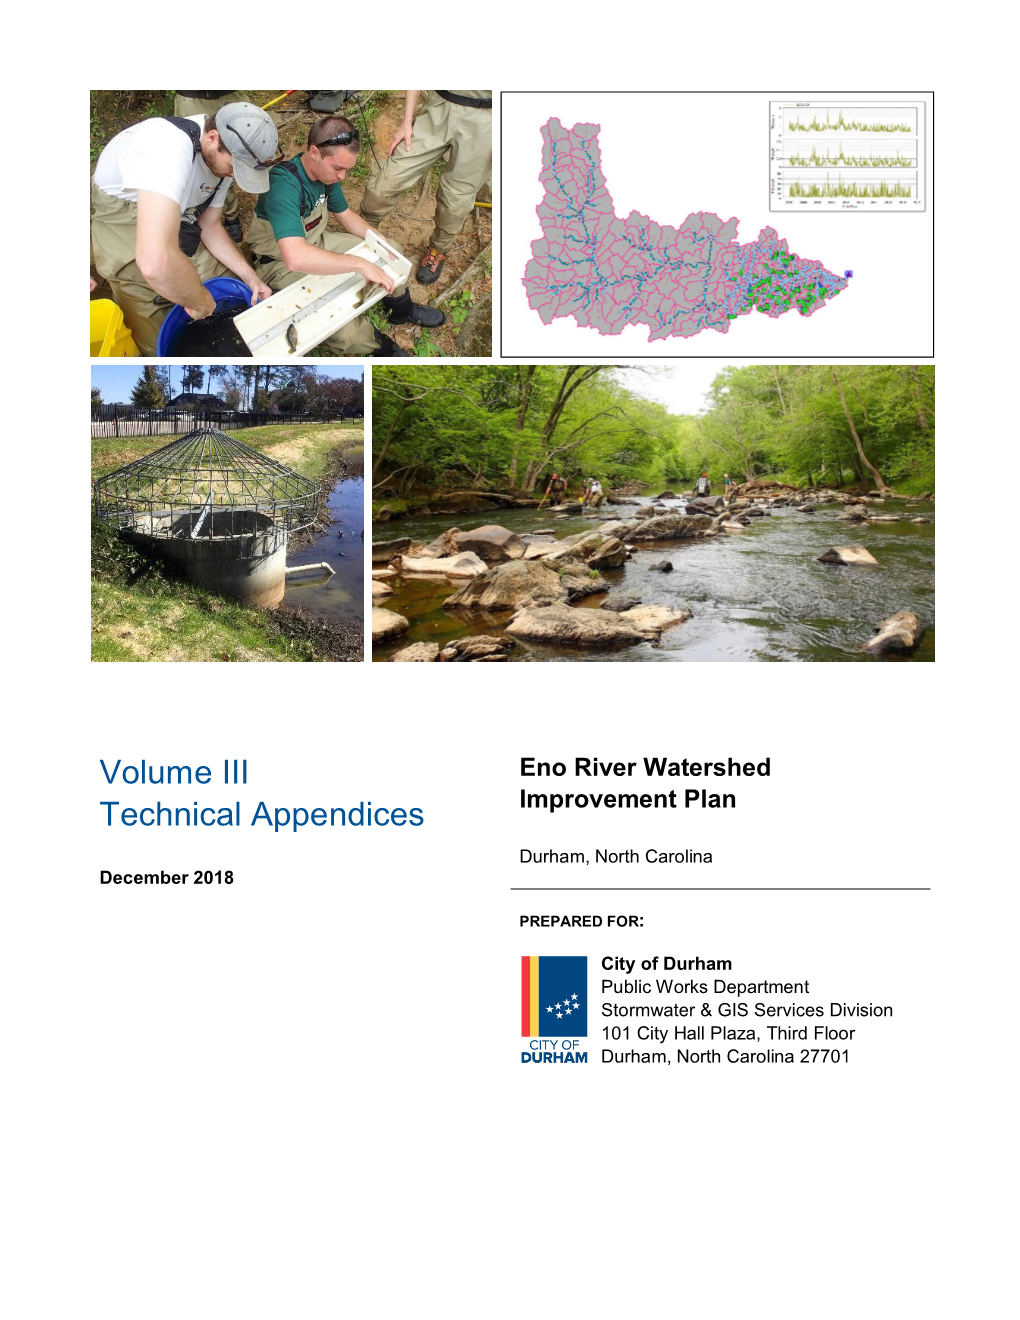 Eno River Watershed Assessment Report